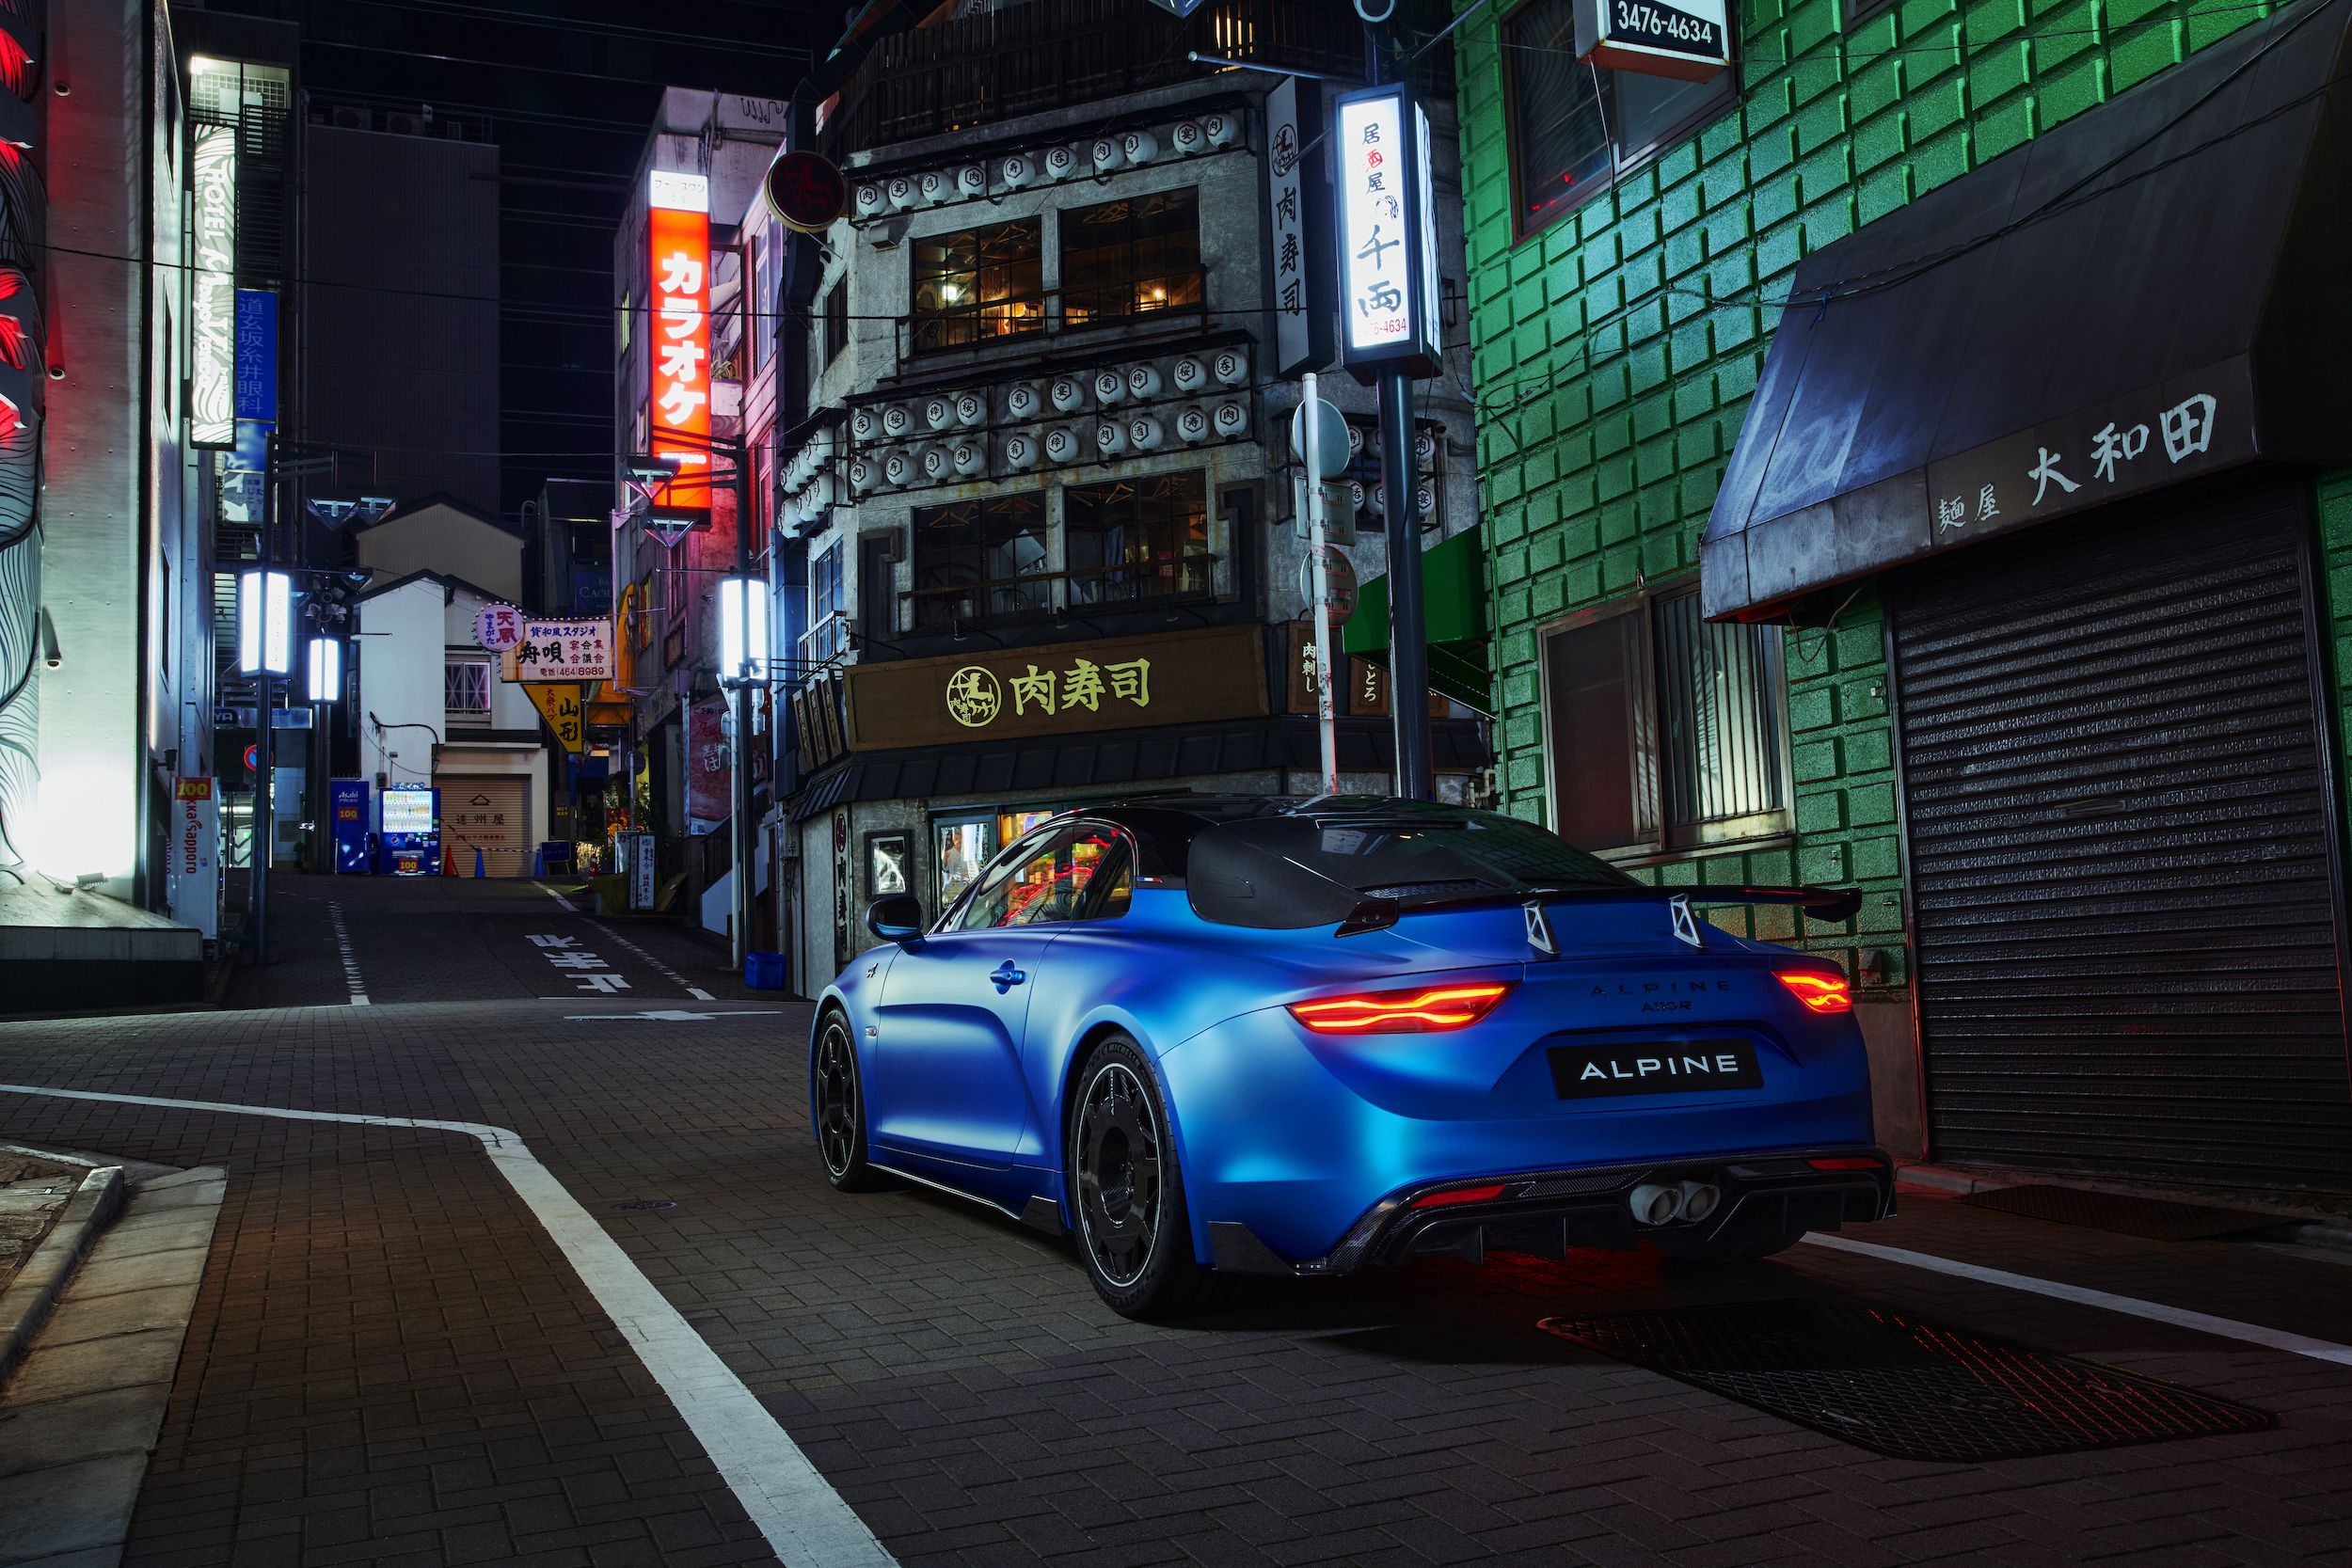 Track-Ready Alpine A110 R Is the French Sports Car of Our Daydreams